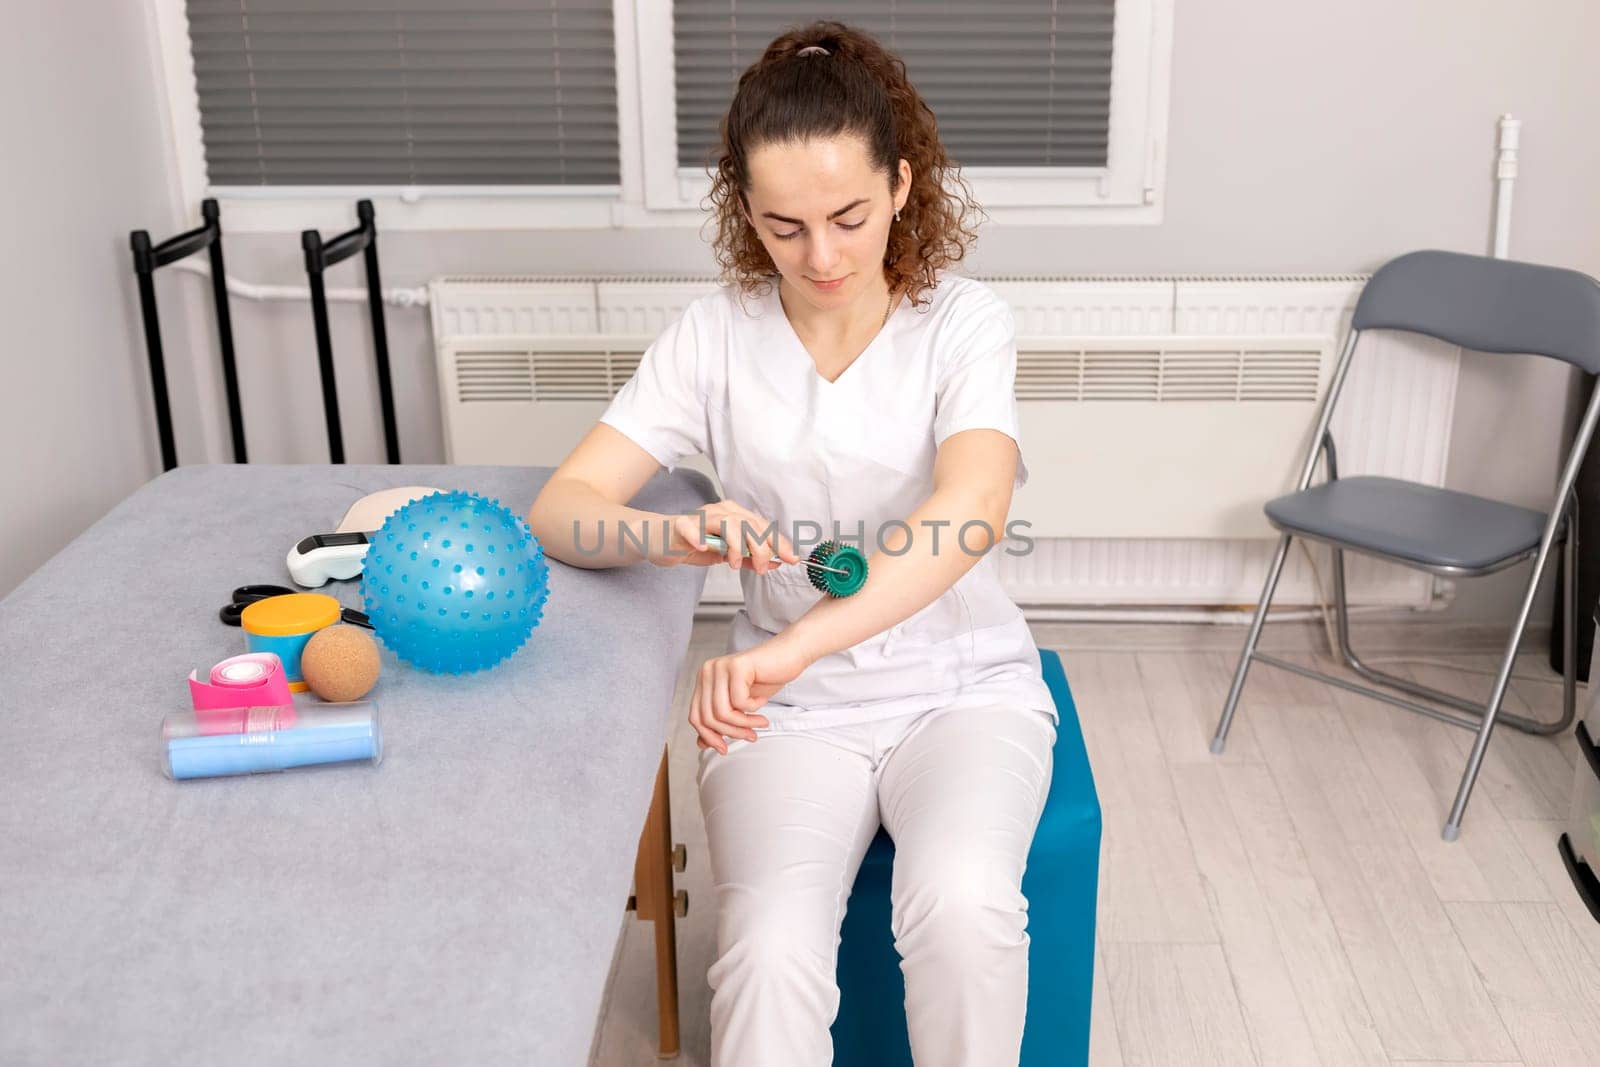 Rehabilitation Specialist, Physical Therapist With Rehab Tools, Foam Roller,Massage Ball With Pimples, Mesoroller With Titanium Needles, Kinesiology Tape On Couch in Therapeutic Room.Horizontal plane. by netatsi